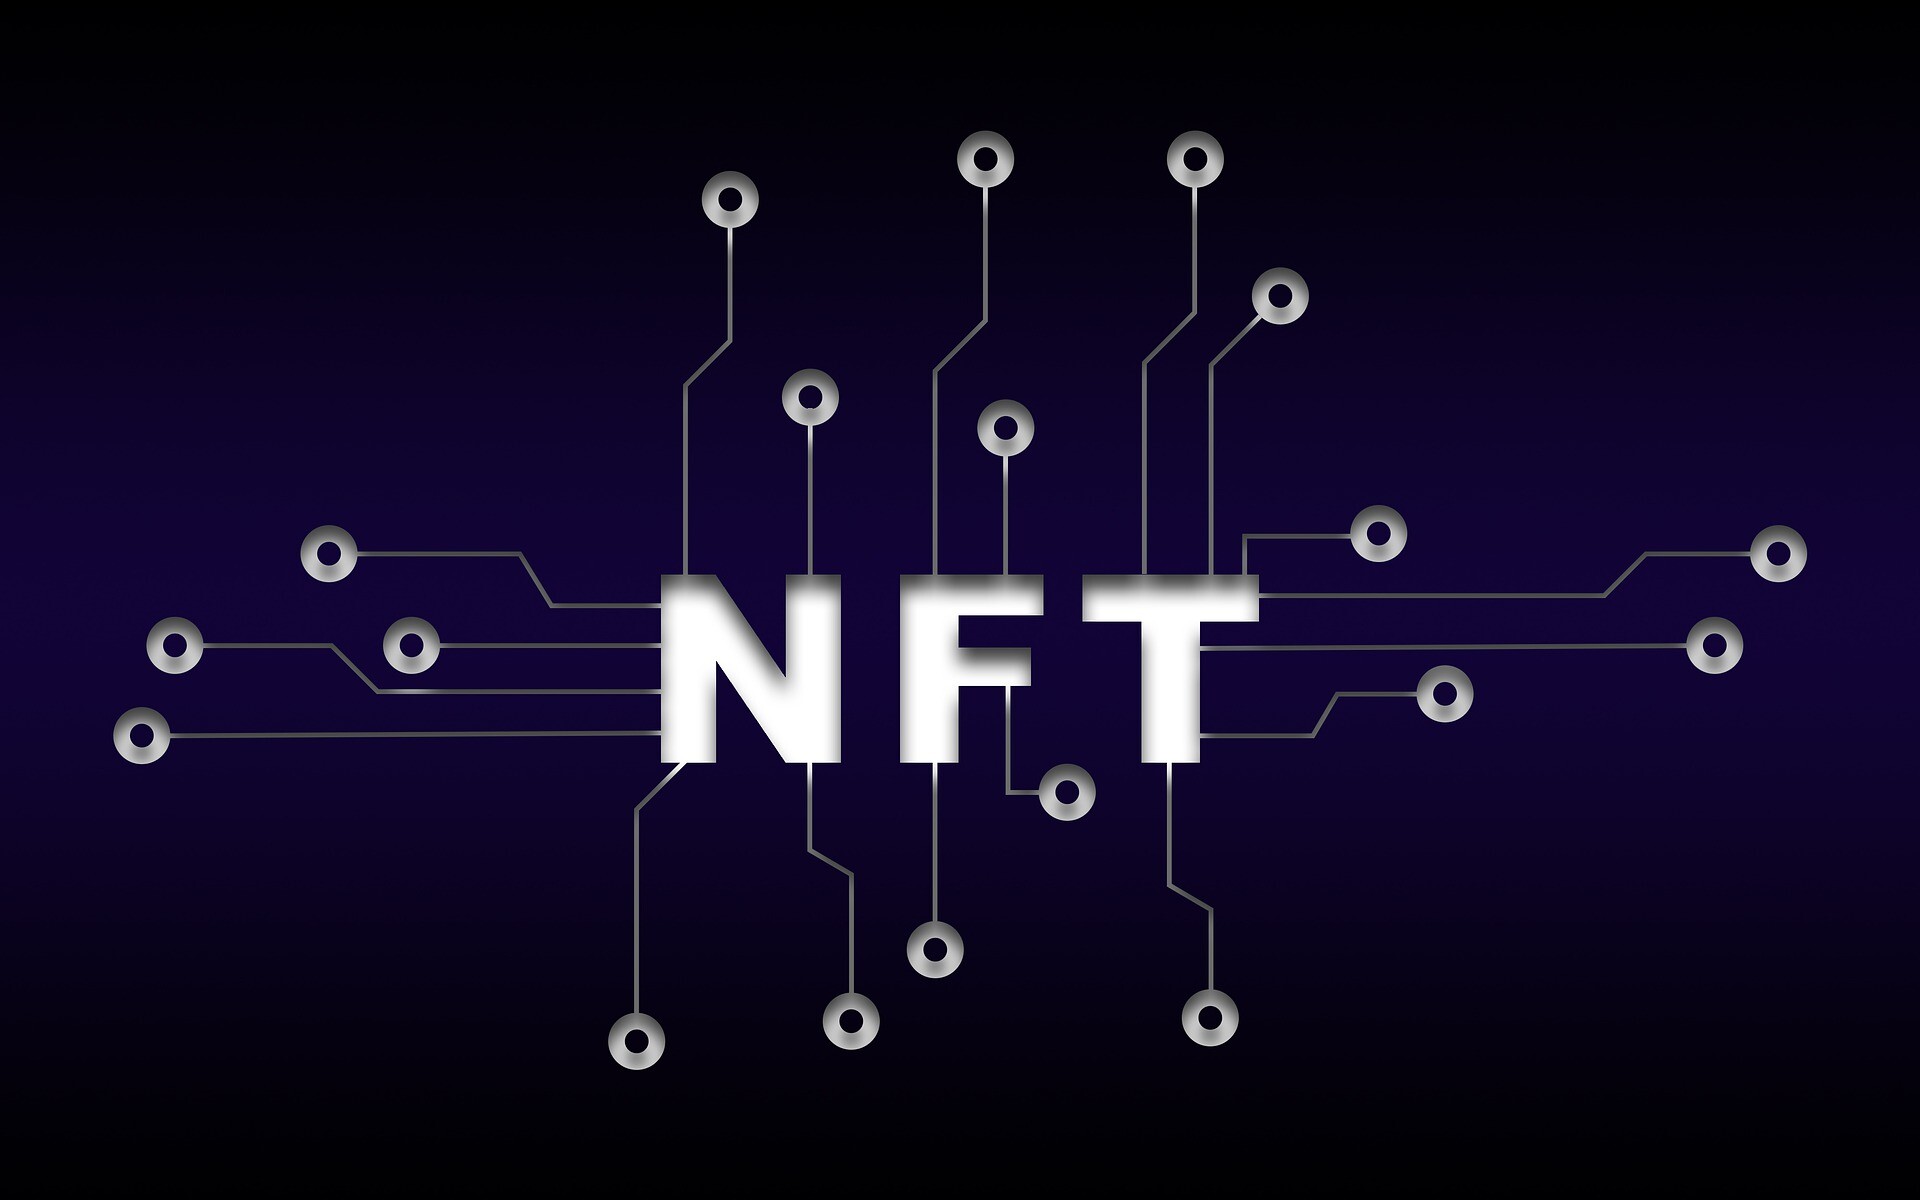 NFT: One-of-a-kind digital assets, Convey ownership of digital content. 1920x1200 HD Wallpaper.